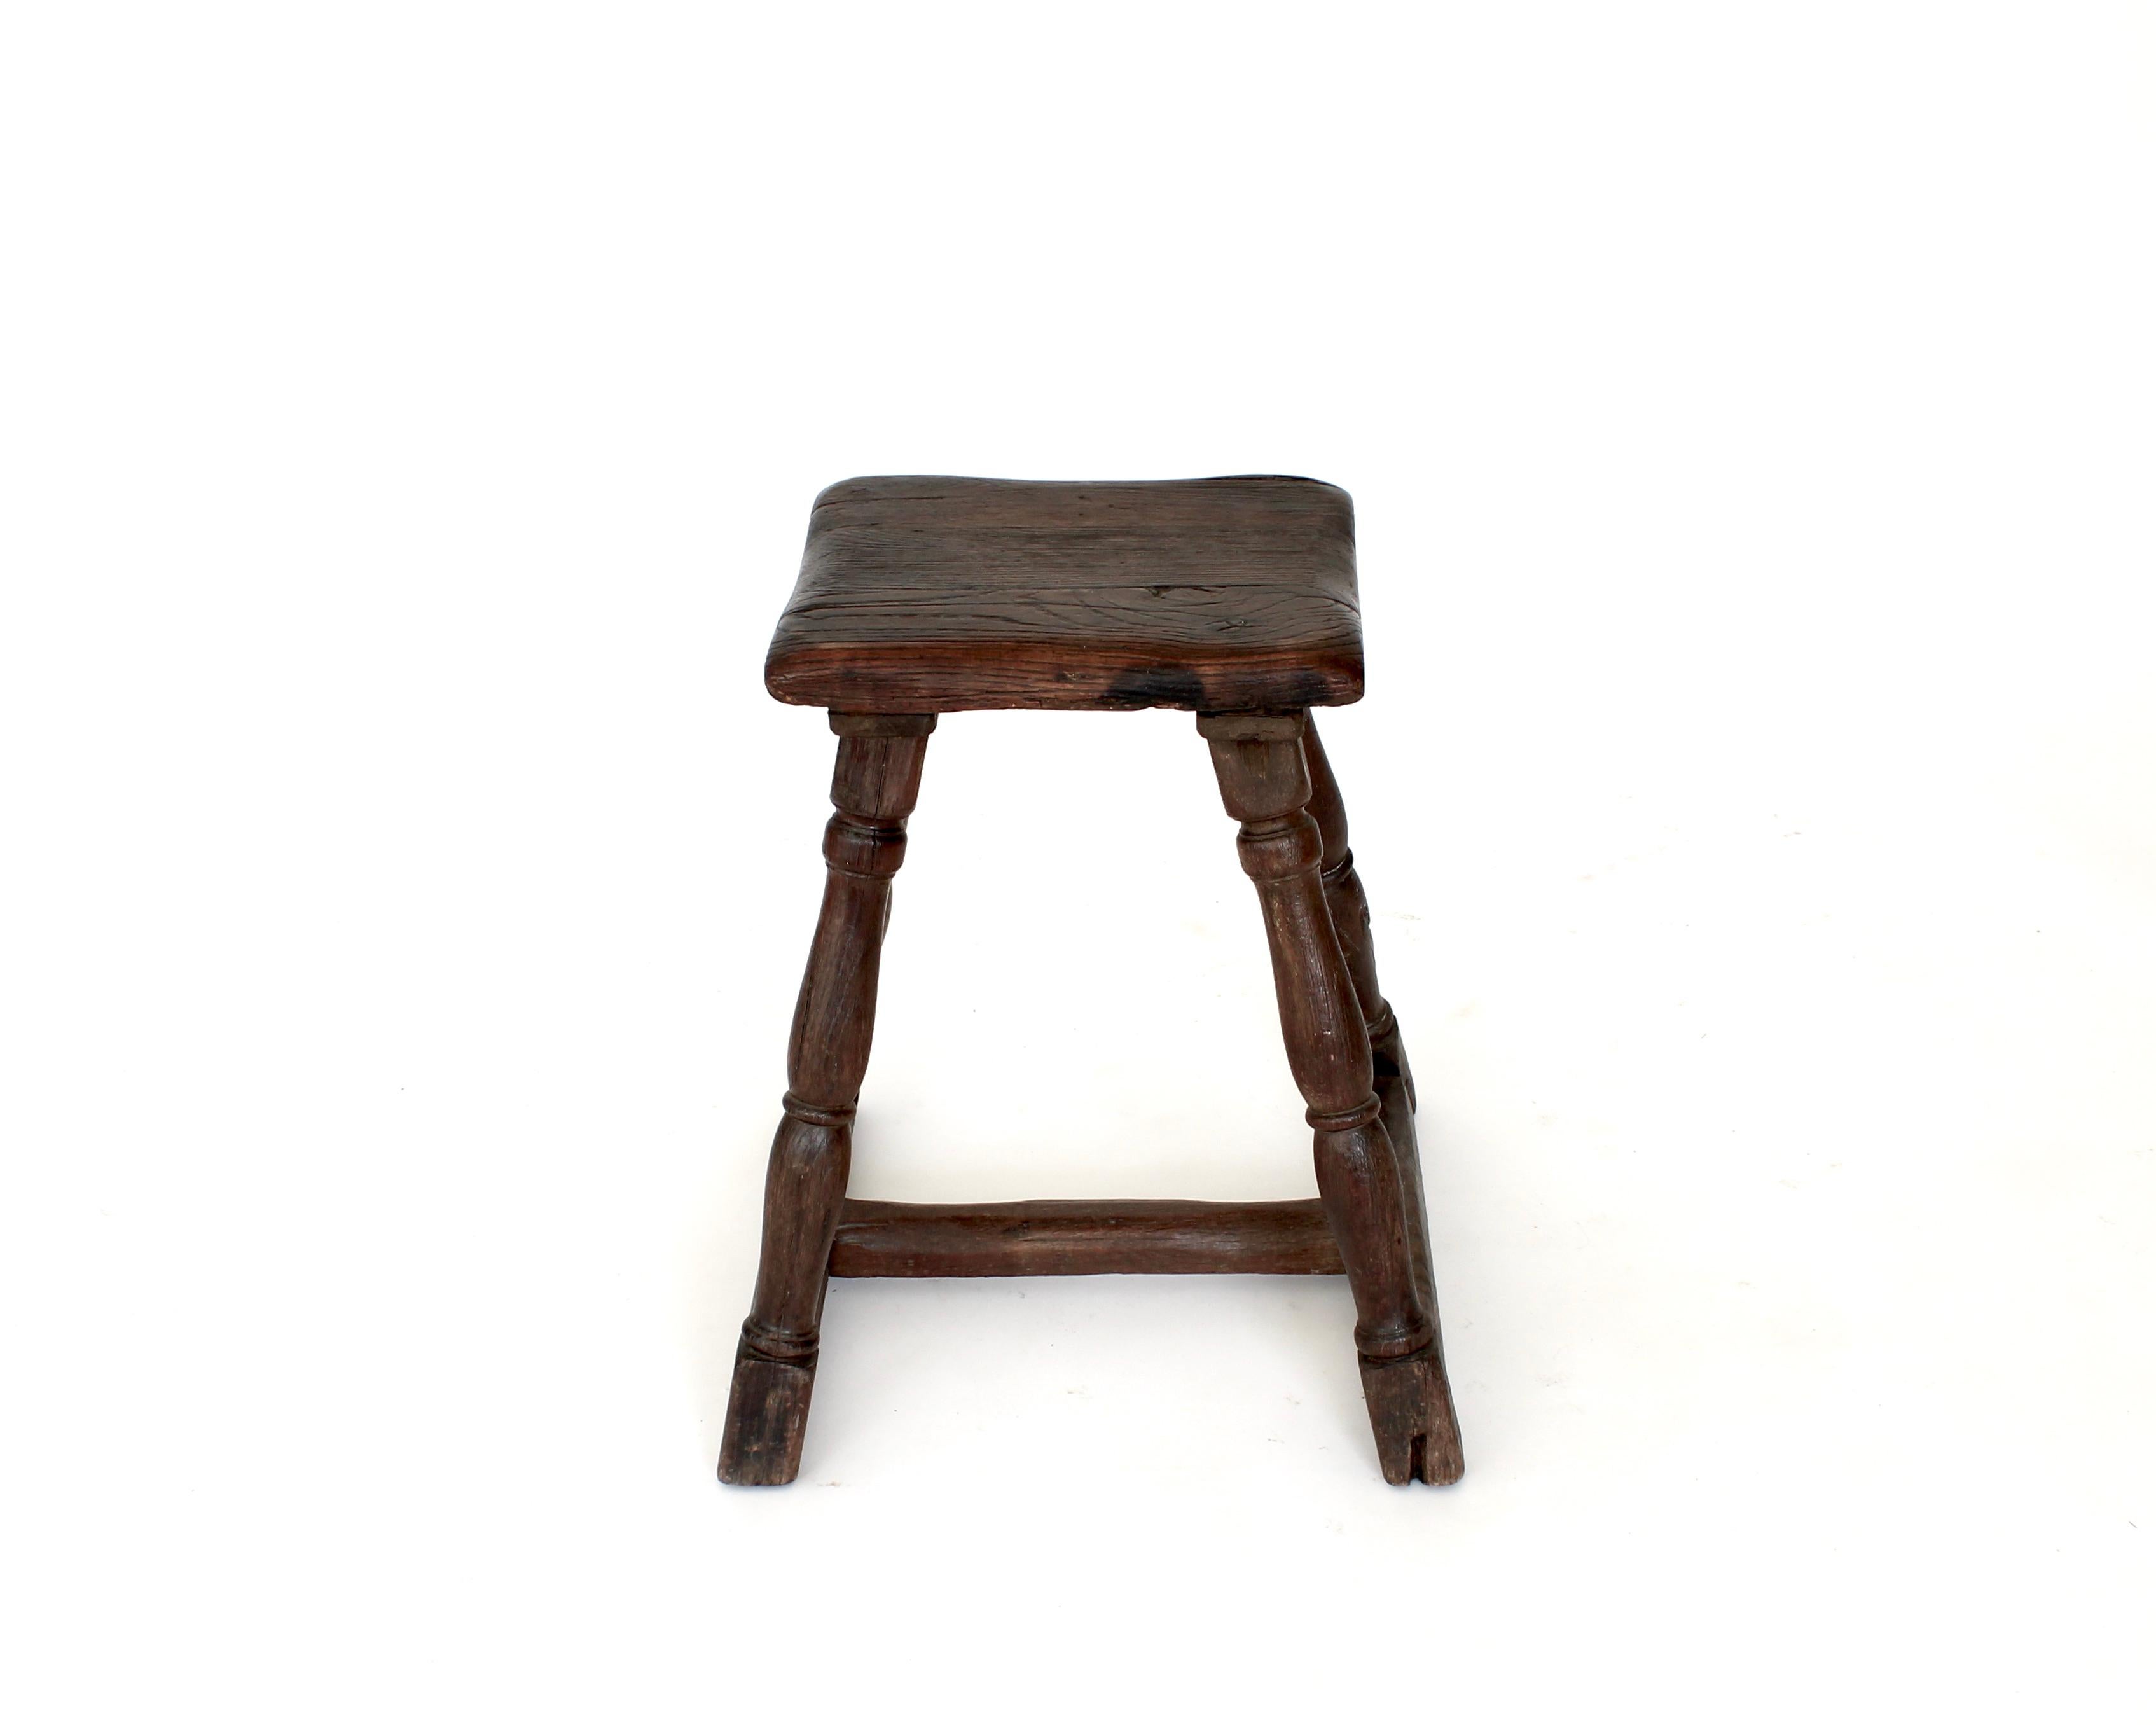 French hand made rustic stool of chestnut wood with a dark patina from age, use and care. The stool being hand made and is created without the use of nails and with only wood pegs as is normal from the time period.
The seat is 11.5